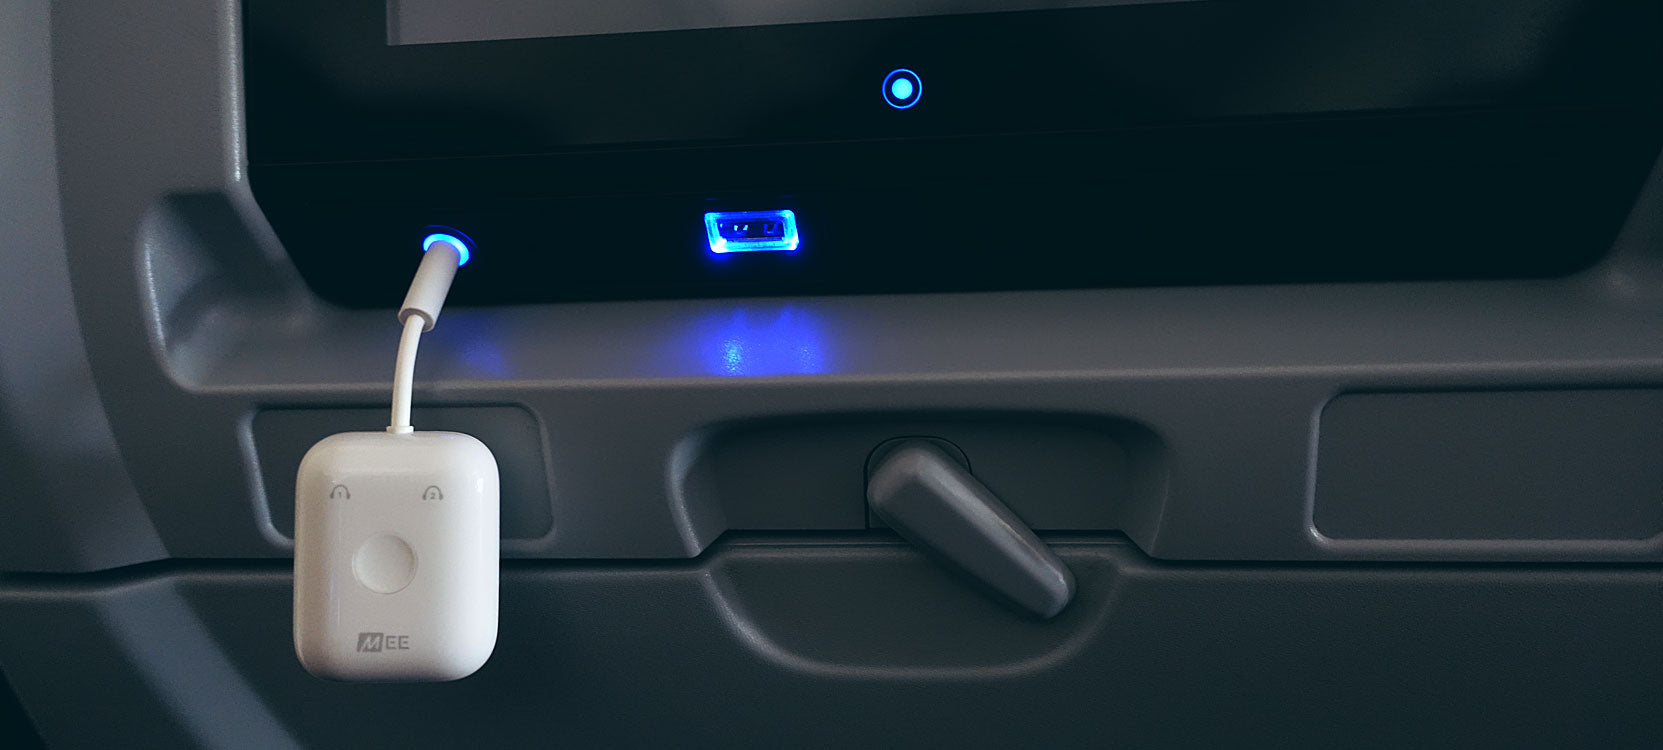 Usb dongle emitting a blue light plugged into a car's dashboard usb port, indicating connectivity or activity.